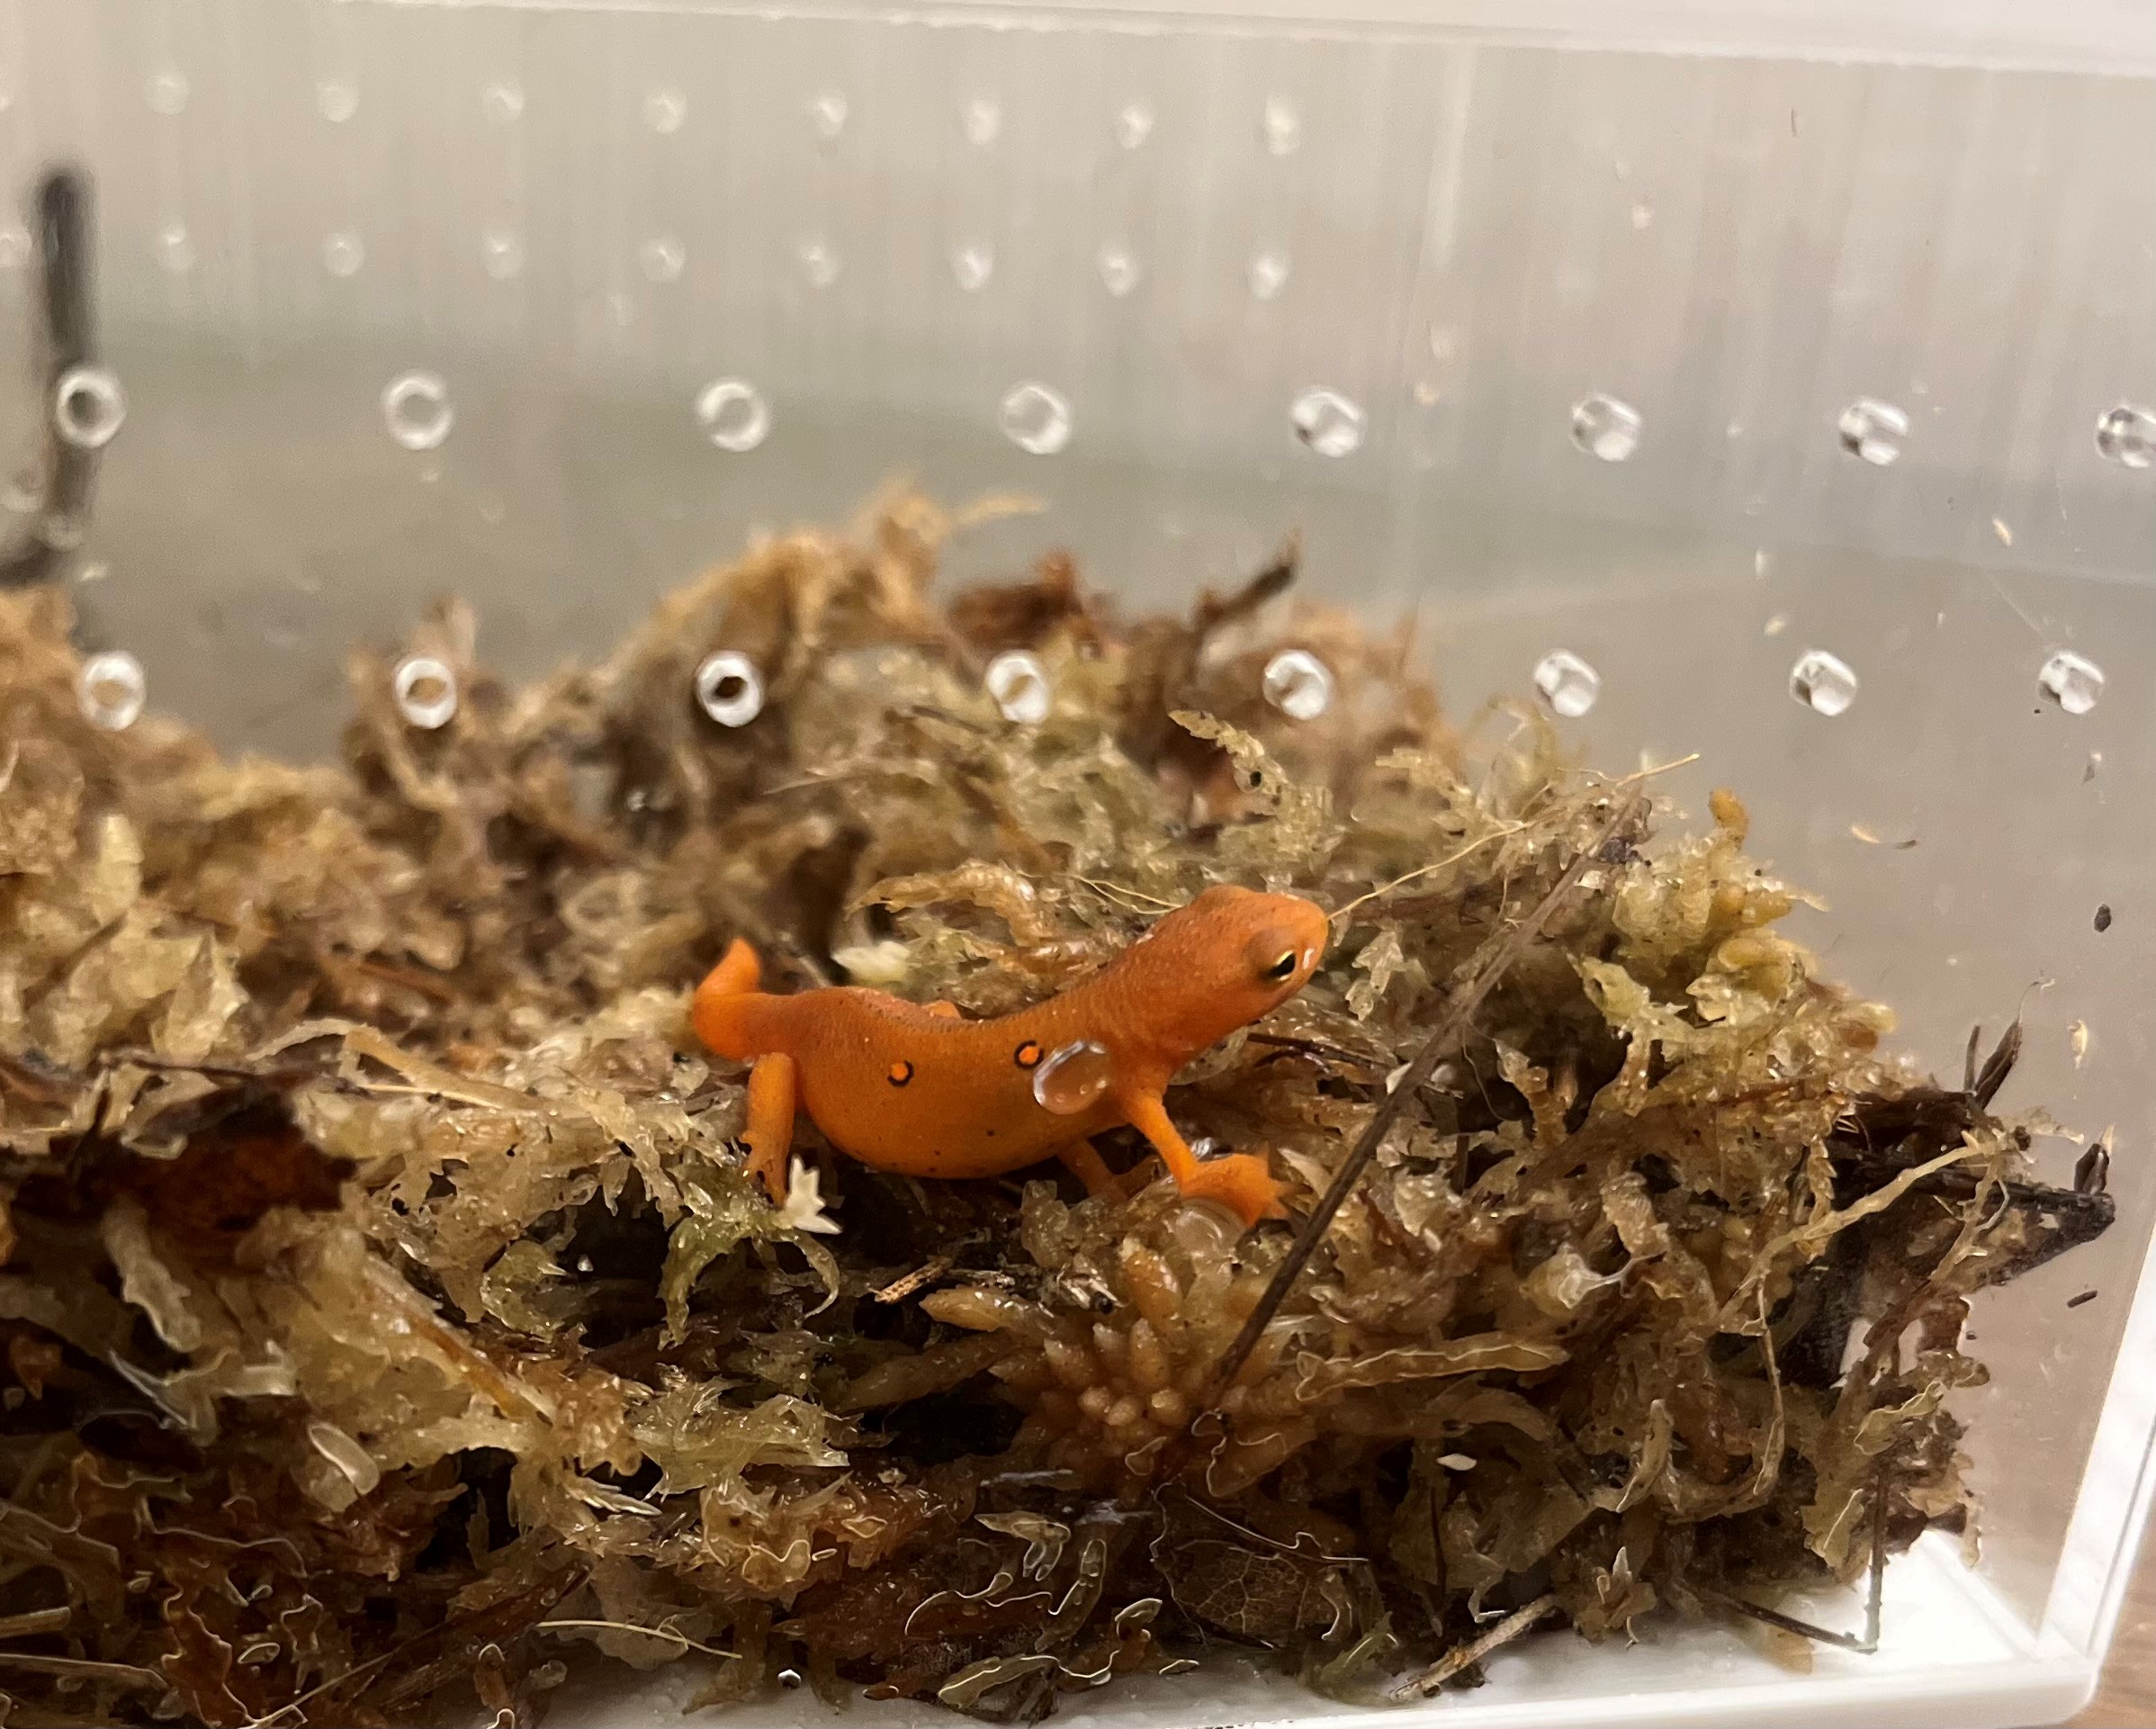 A red eft, one of ARMI’s ambassador amphibians<br />Photo by: Erin Muths